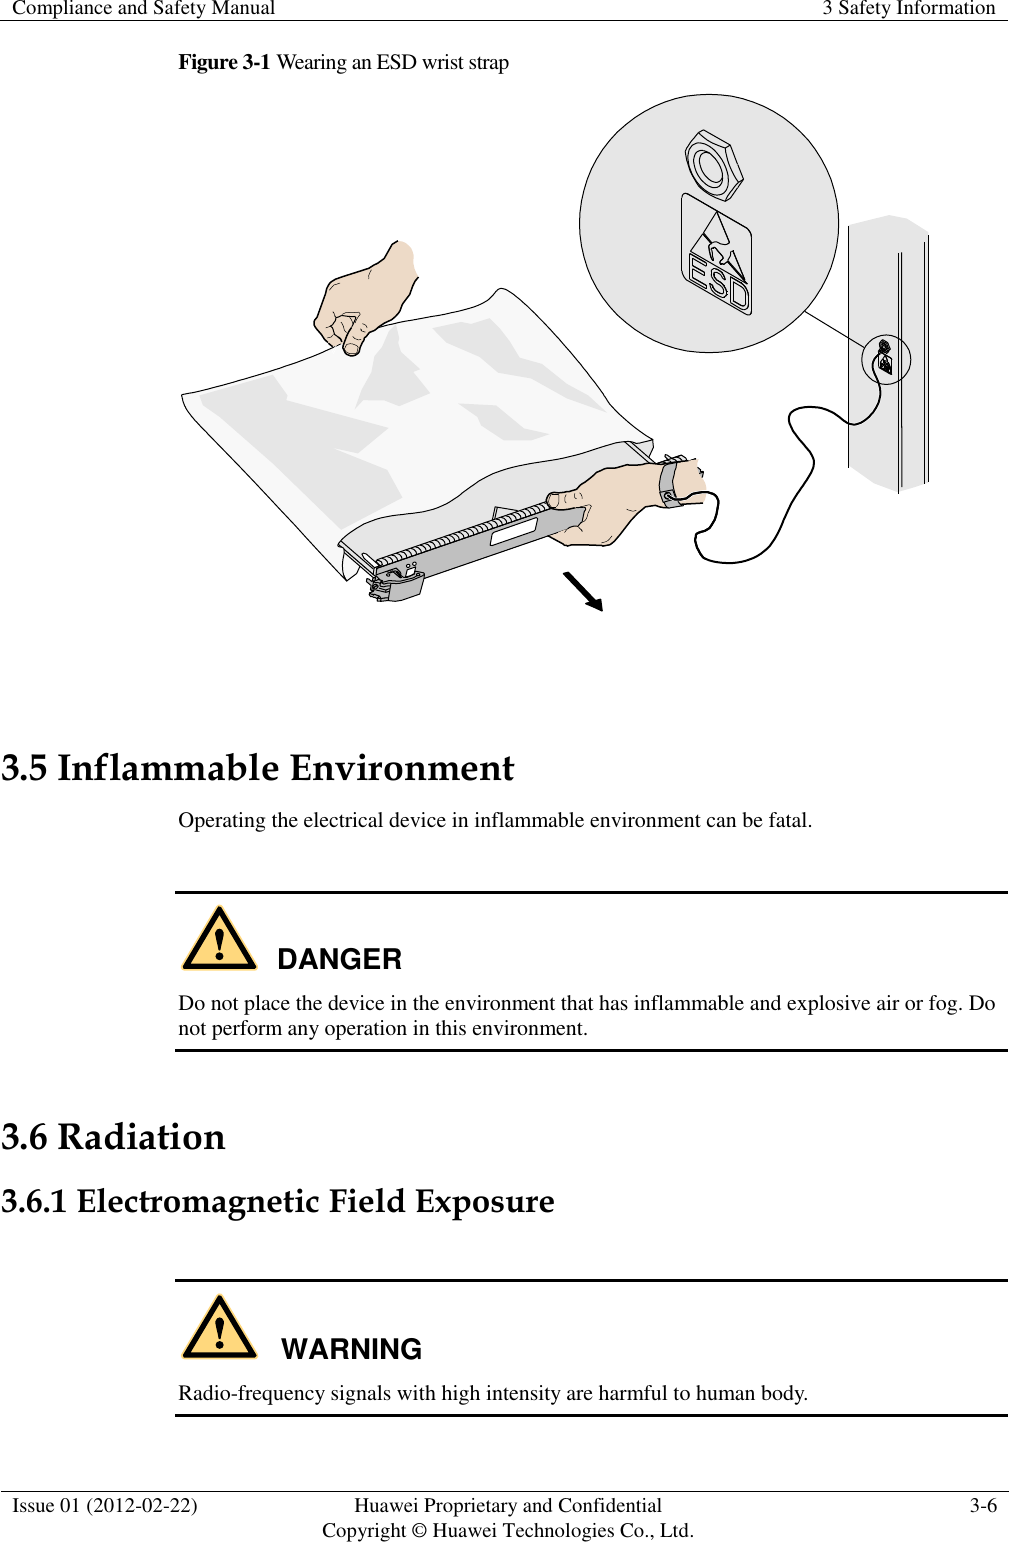 Compliance and Safety Manual 3 Safety Information  Issue 01 (2012-02-22) Huawei Proprietary and Confidential           Copyright © Huawei Technologies Co., Ltd. 3-6  Figure 3-1 Wearing an ESD wrist strap   3.5 Inflammable Environment Operating the electrical device in inflammable environment can be fatal.  DANGER Do not place the device in the environment that has inflammable and explosive air or fog. Do not perform any operation in this environment. 3.6 Radiation 3.6.1 Electromagnetic Field Exposure  WARNING Radio-frequency signals with high intensity are harmful to human body. 